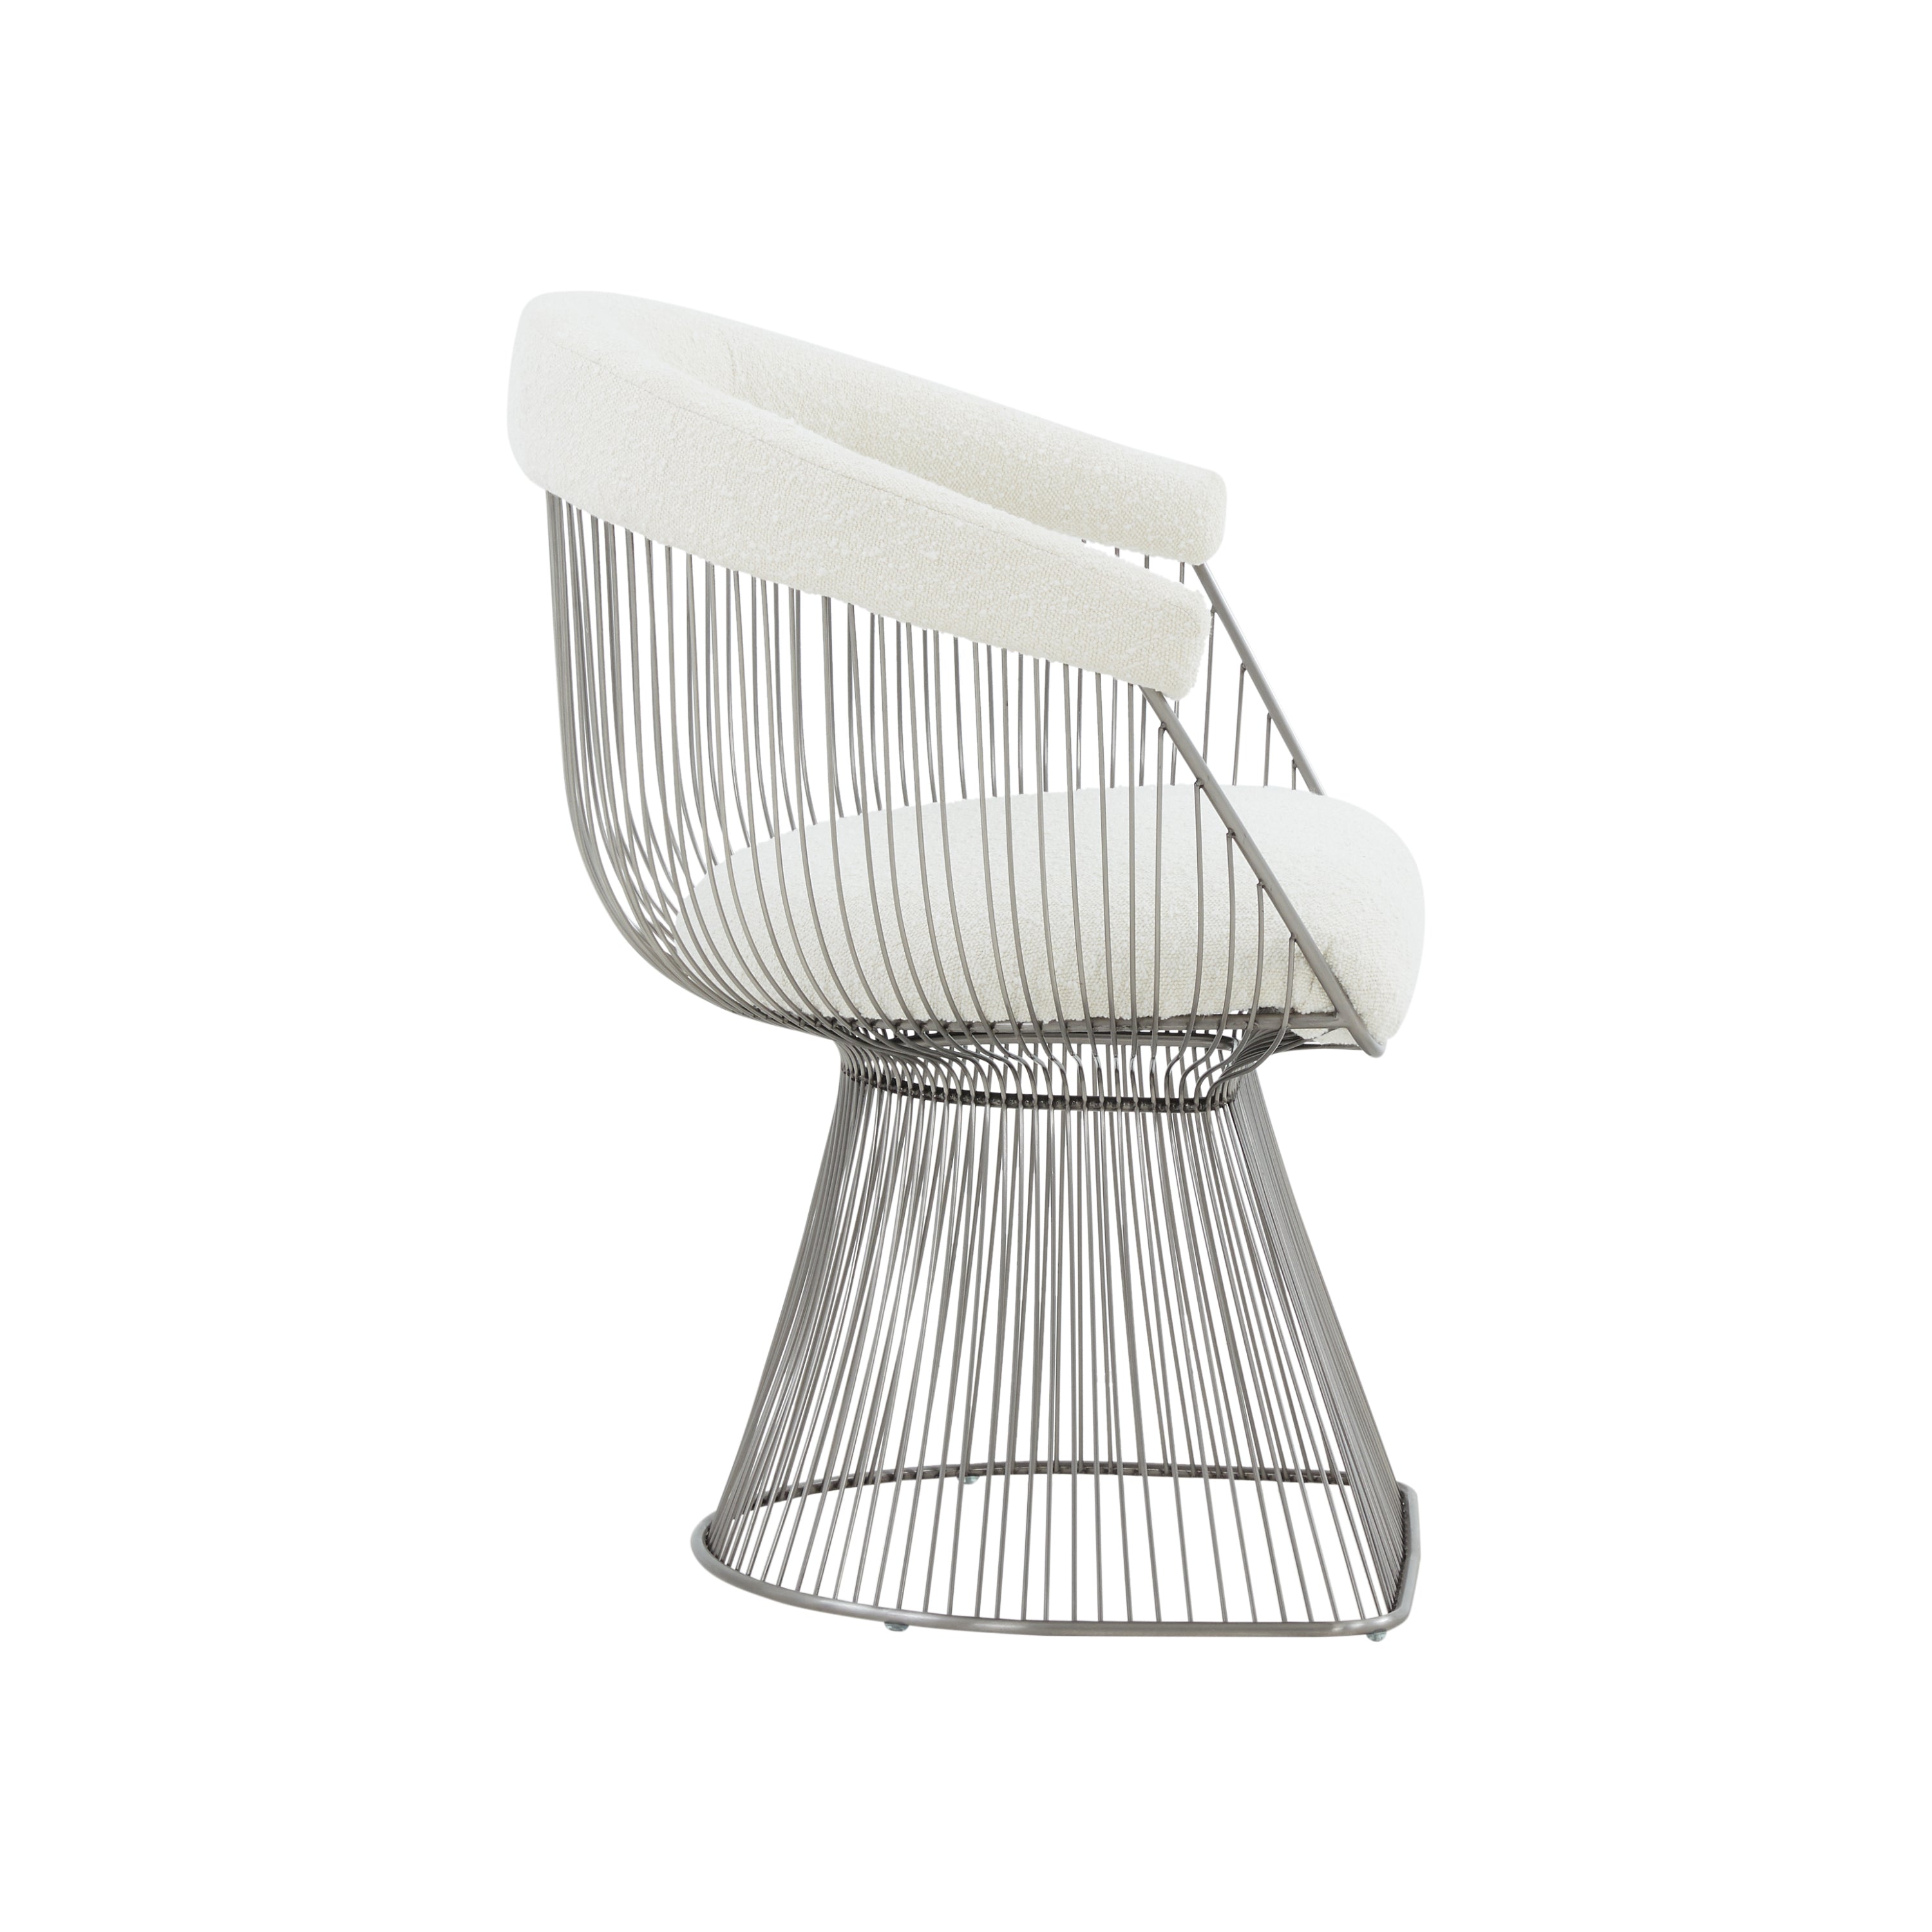 Modern White Shepra and Matte Silver Dining or Accent Chair